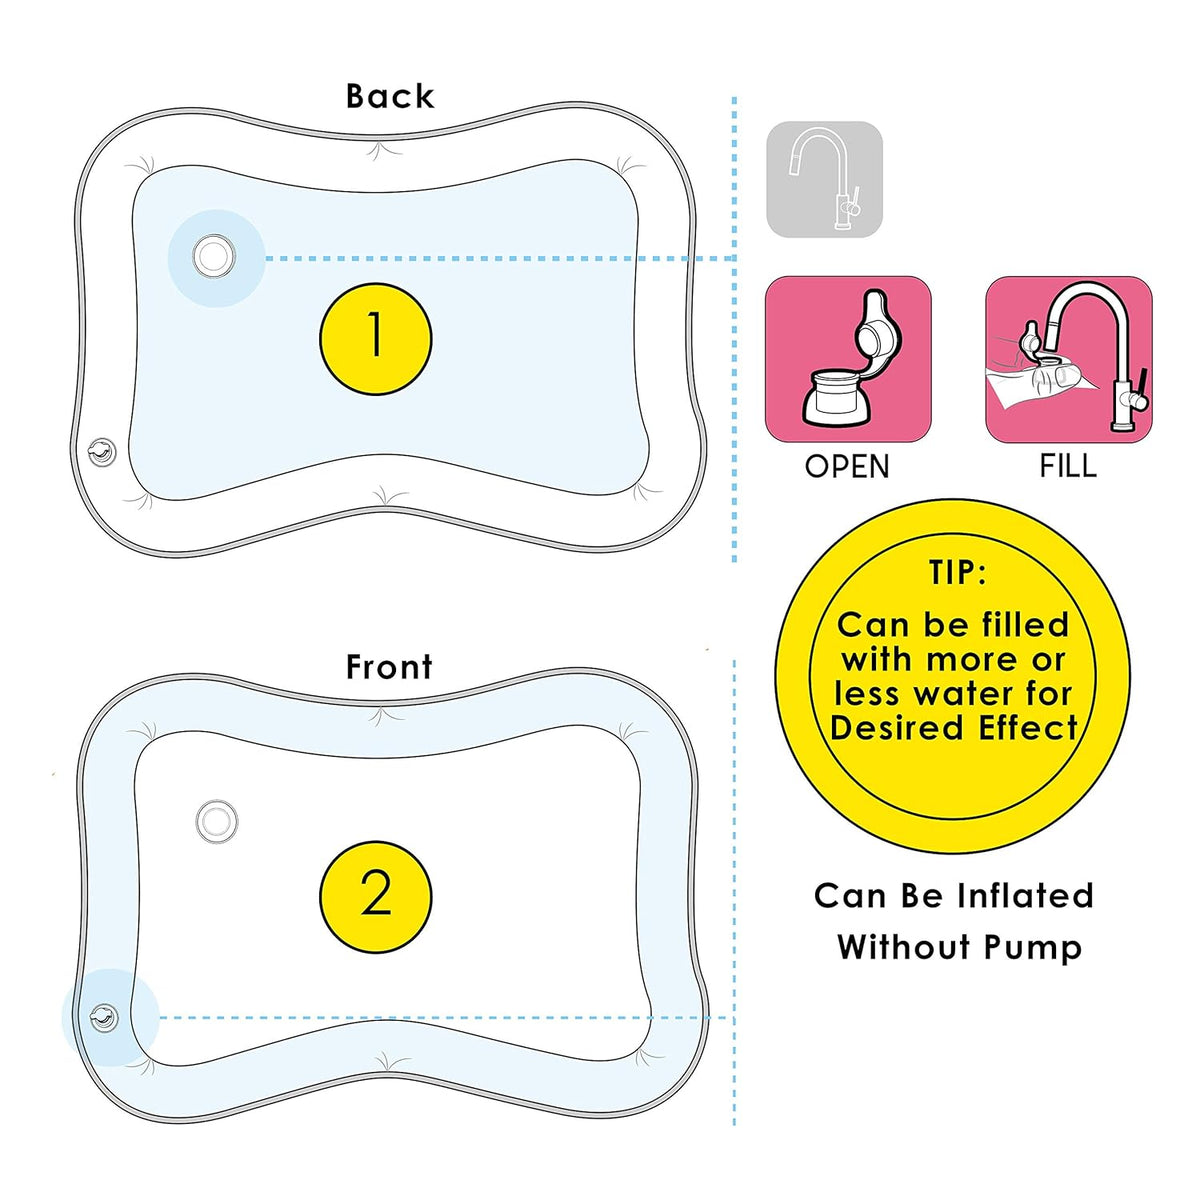 Splashin'kids Inflatable Tummy time Premium Water mat Infants and Toddlers is The Perfect Fun time Play Activity Center Your Baby's Stimulation Growth